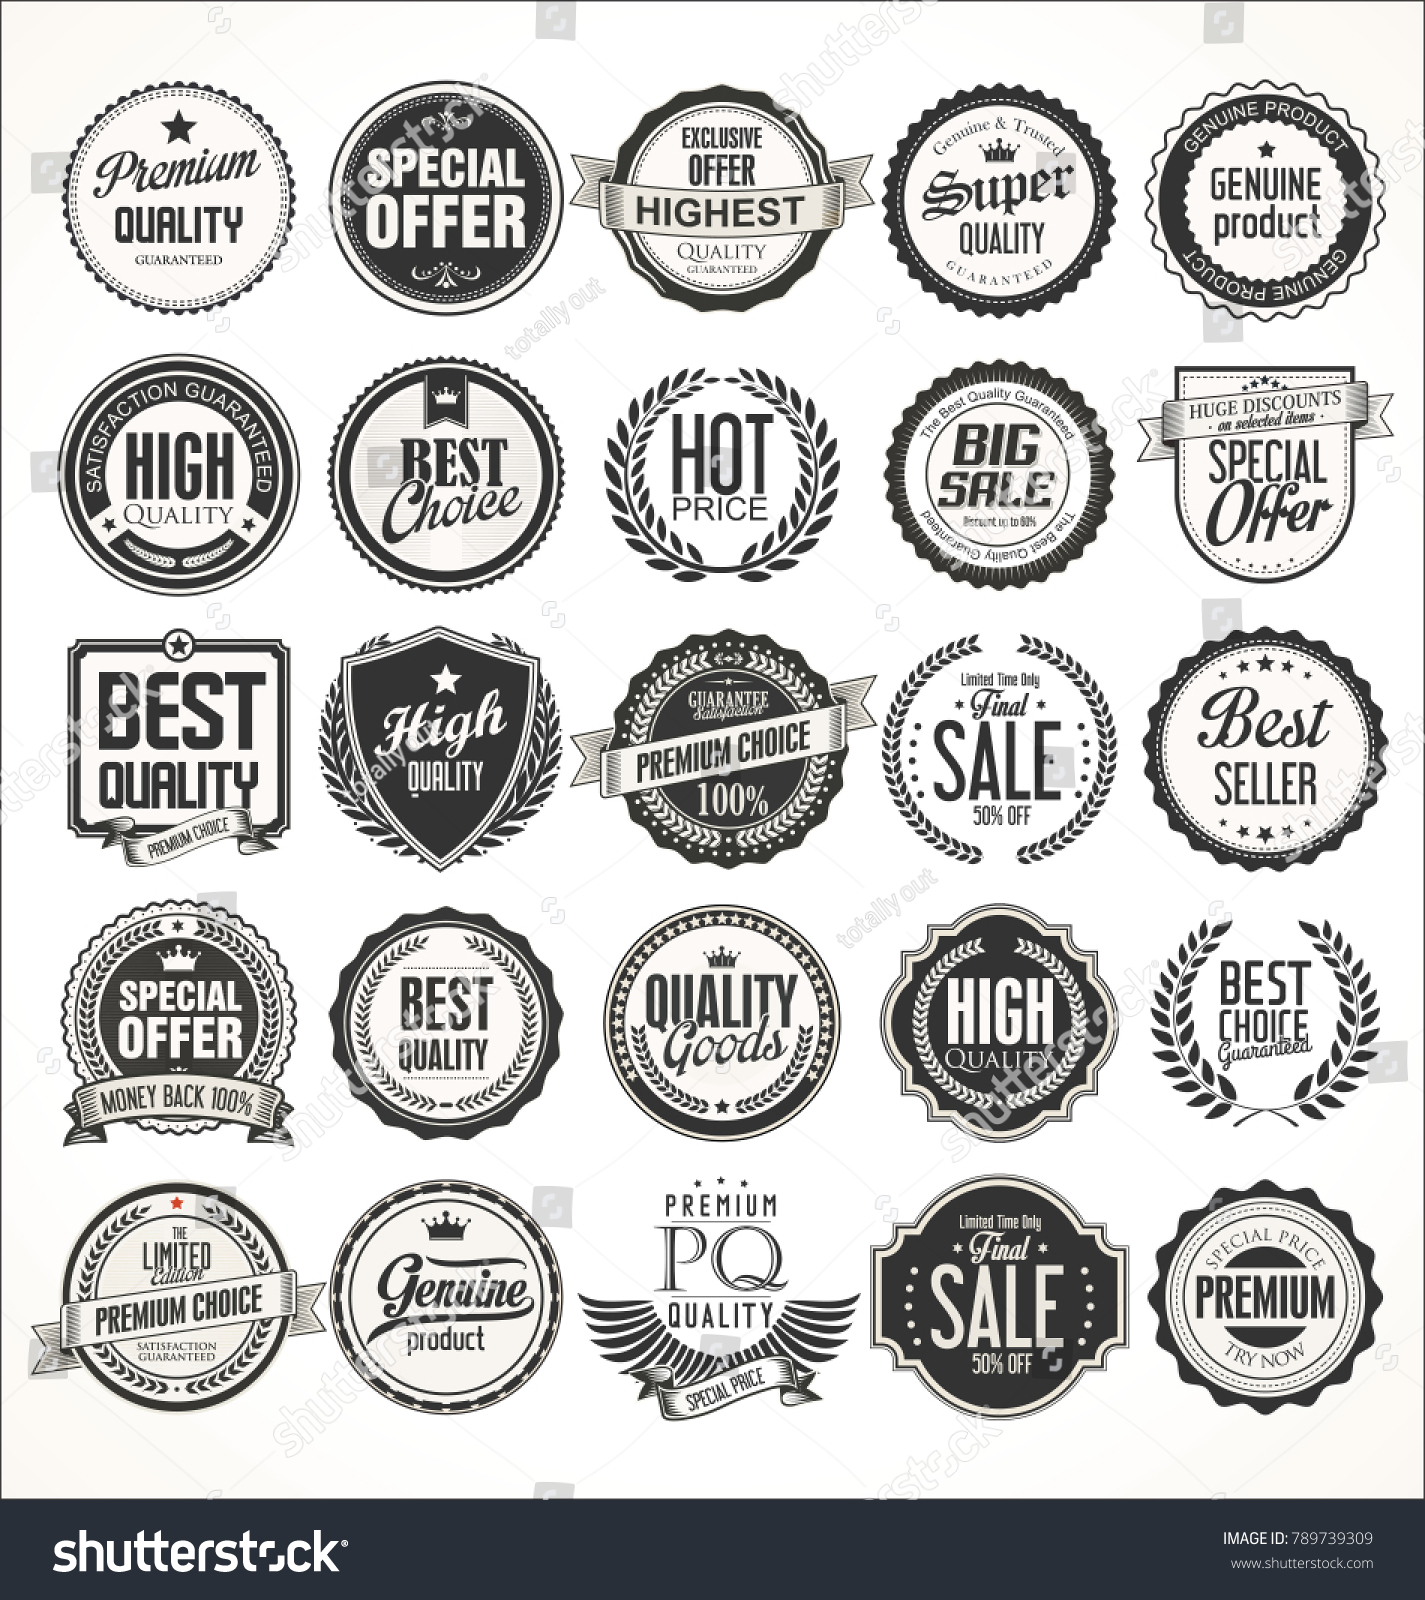 Retro vintage badges and labels collection #789739309